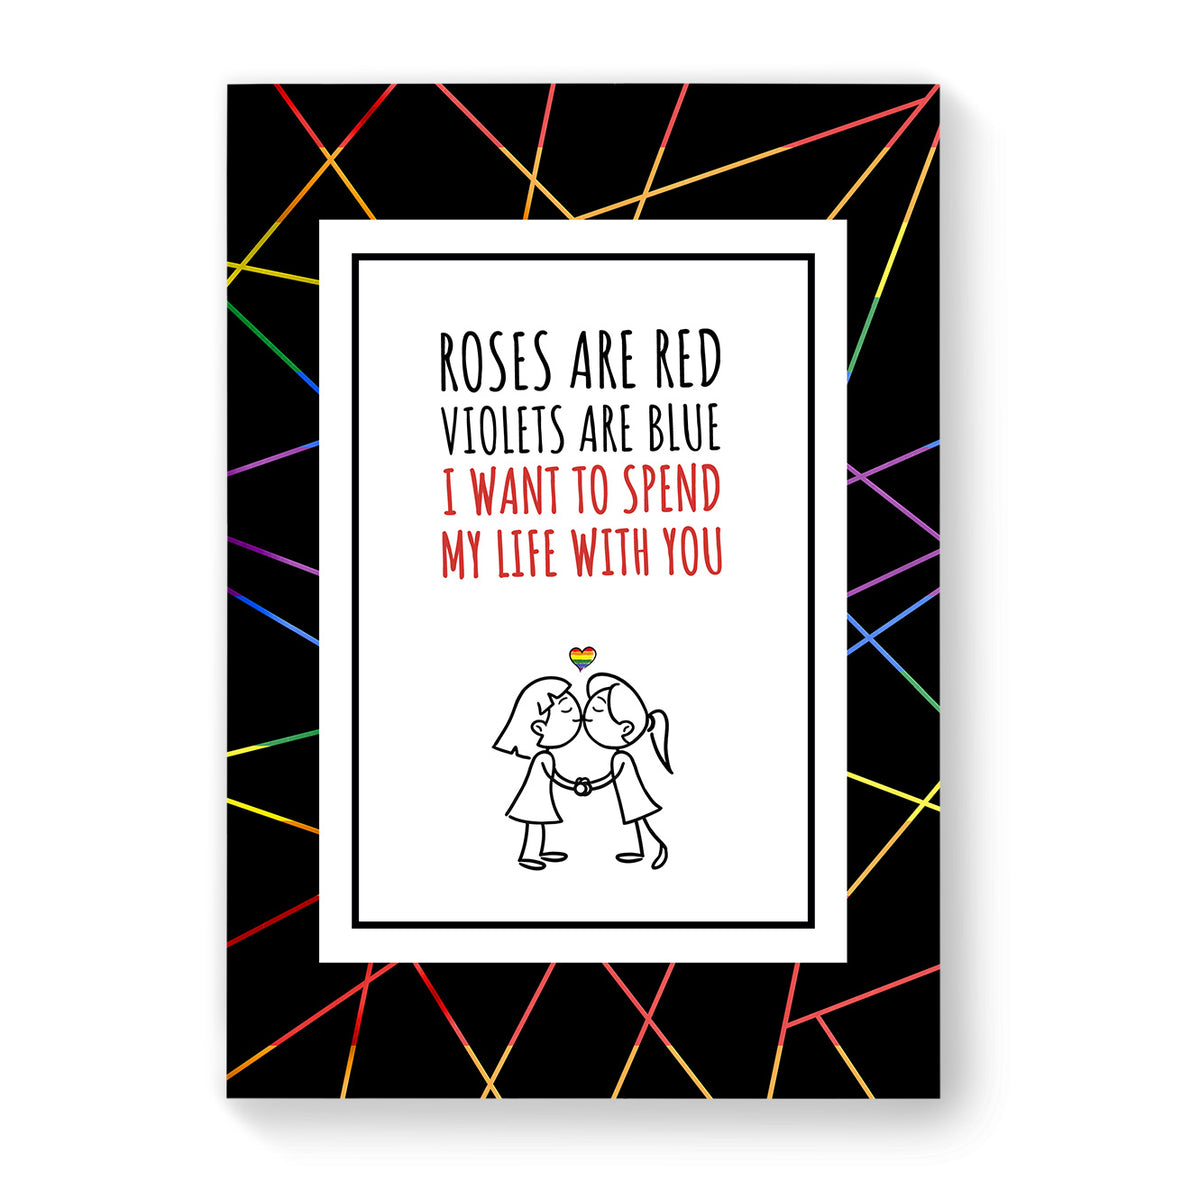 I want to spend my life with you - Lesbian Gay Couple Card - Black Geometric | Gift